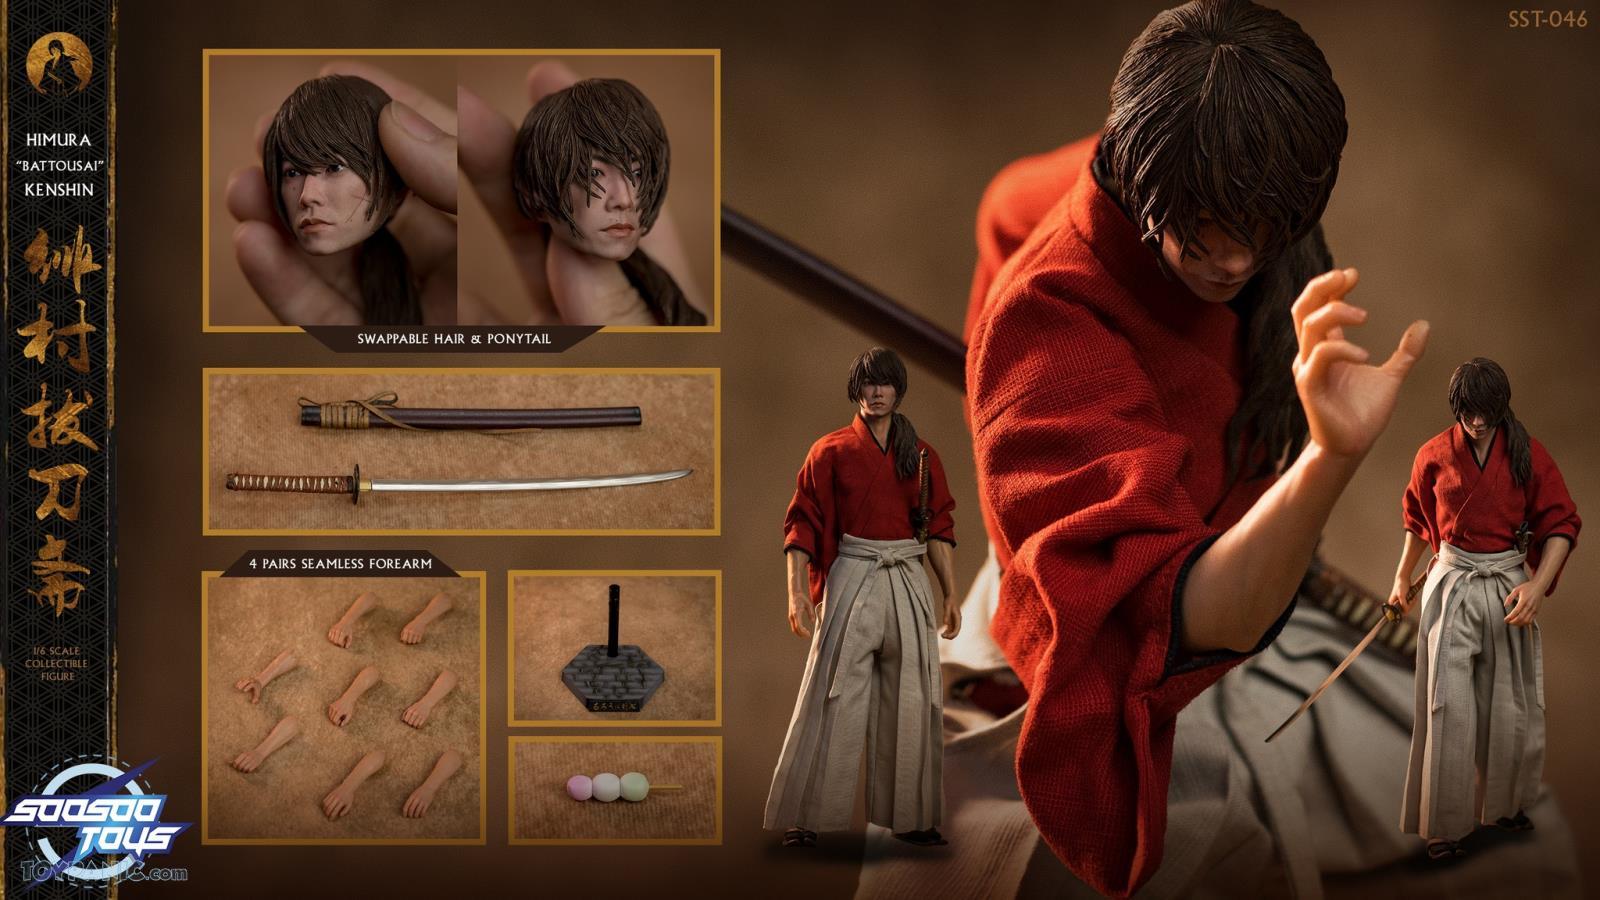 himura - NEW PRODUCT: 1/6 scale Rurouni Kenshin Collectible Figure from SooSooToys 712202251234PM_474230